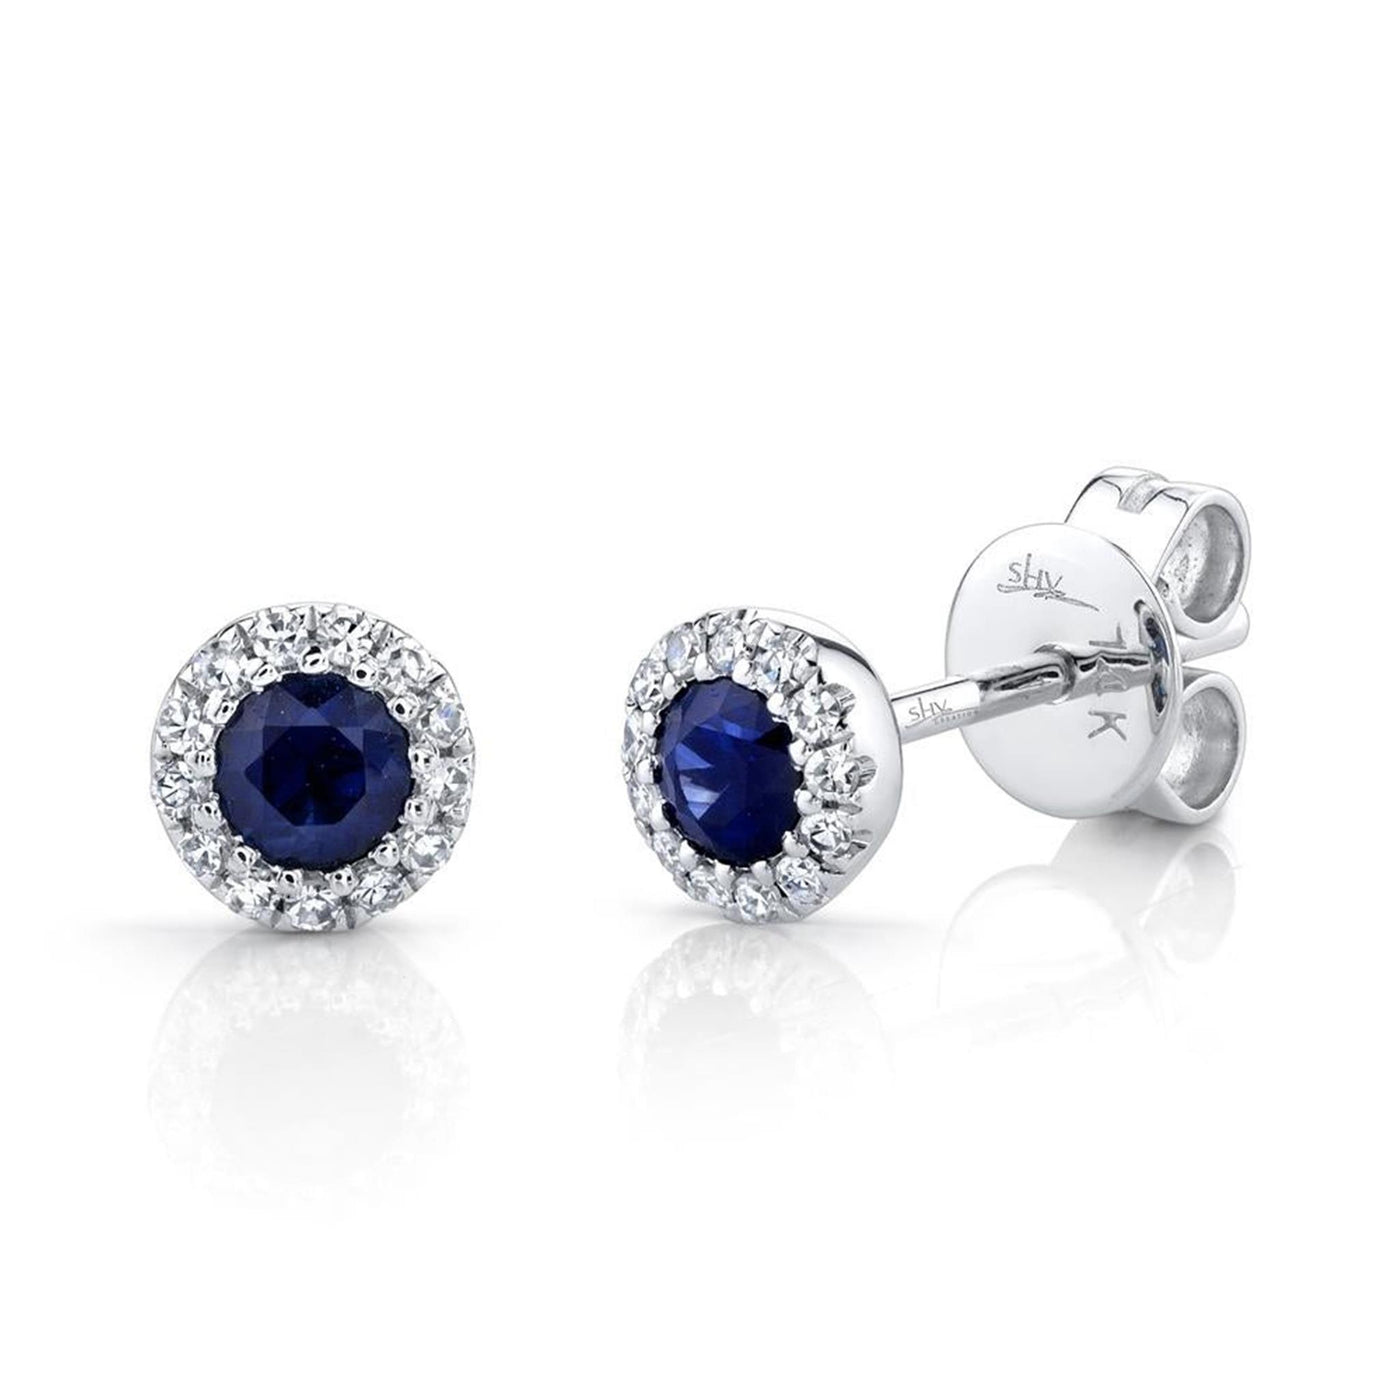 Shy Creation 14K White Gold 0.36ctw Cluster Style Round Sapphire and Diamond Earrings